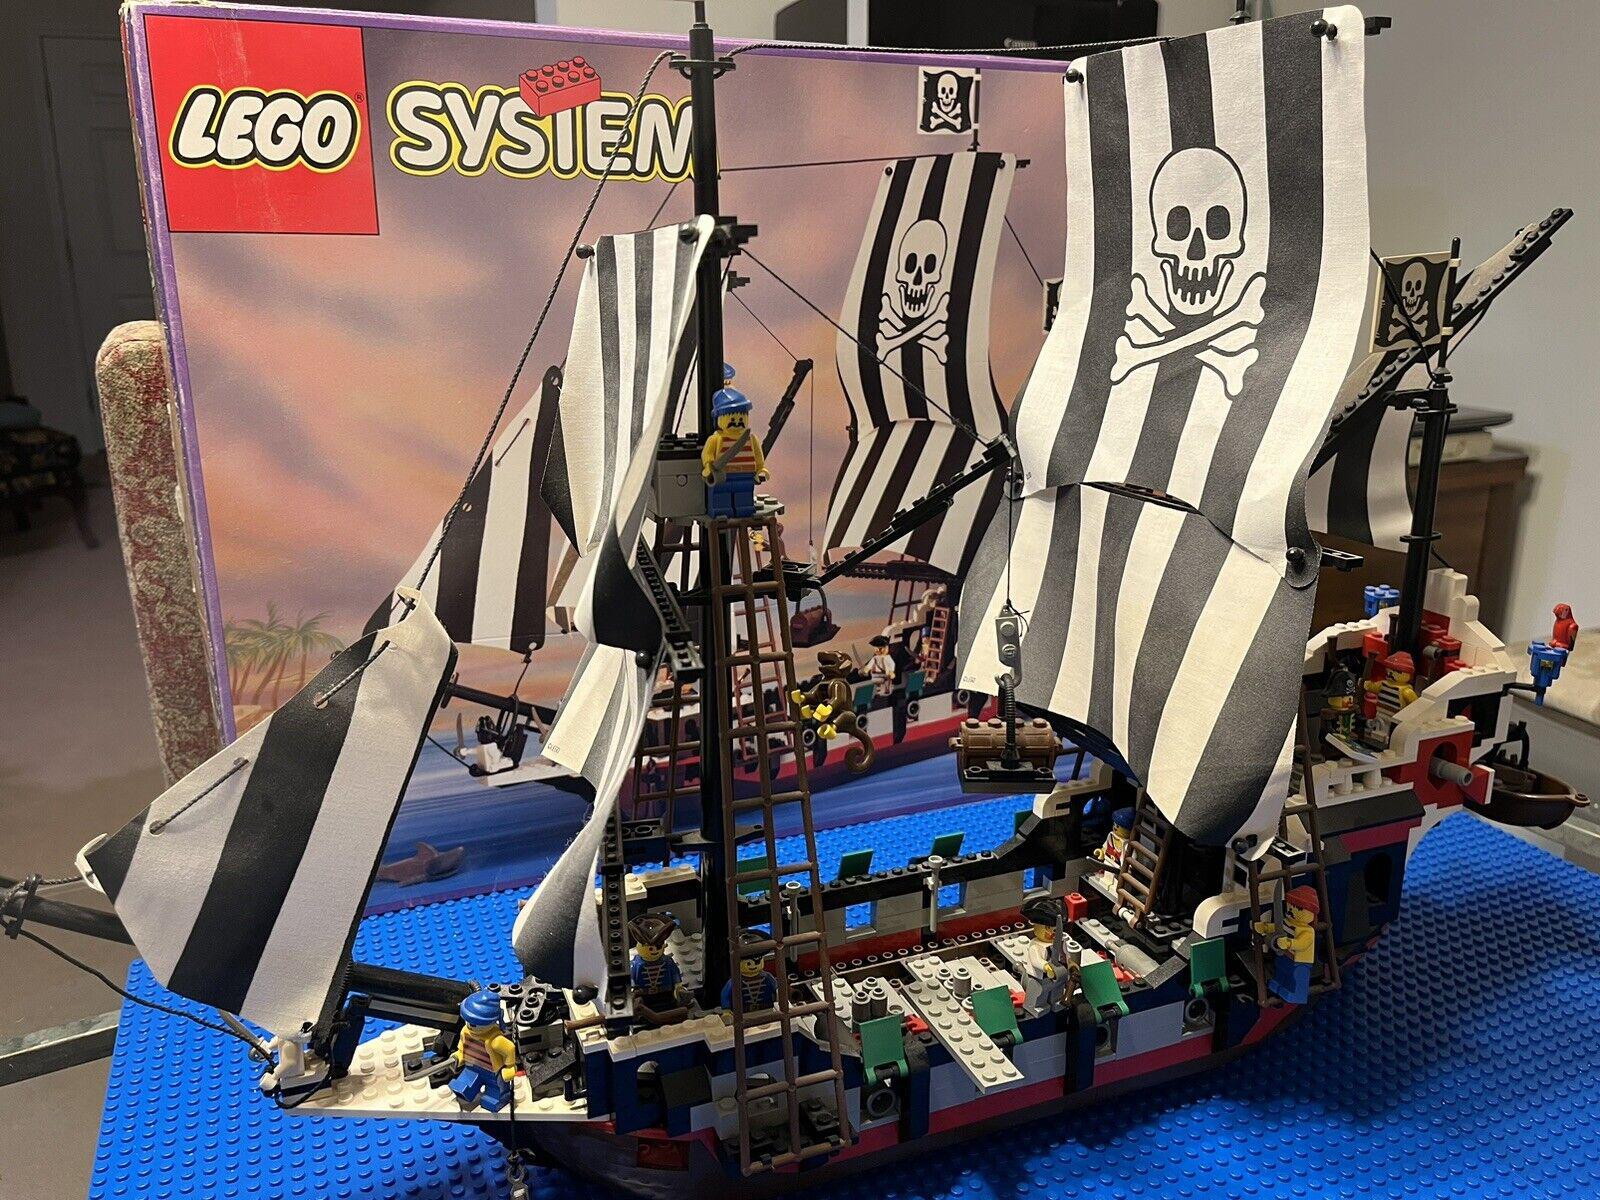 Most Valuable Lego Pirate Ships and Sets